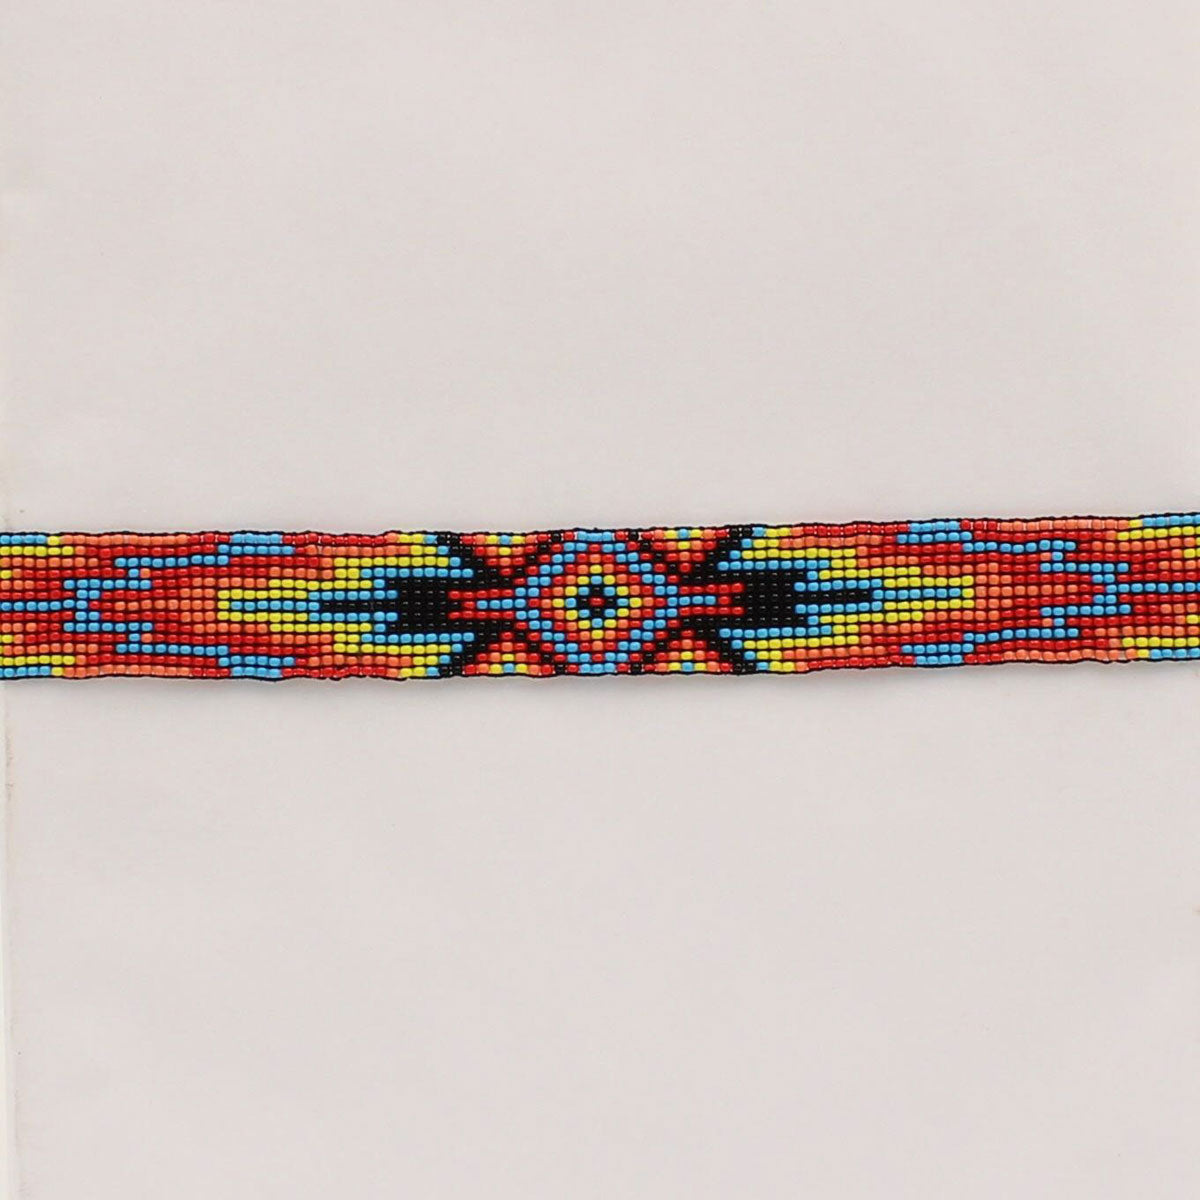 TWISTER HATBAND BEADED STRETCH  MULTICOLORED